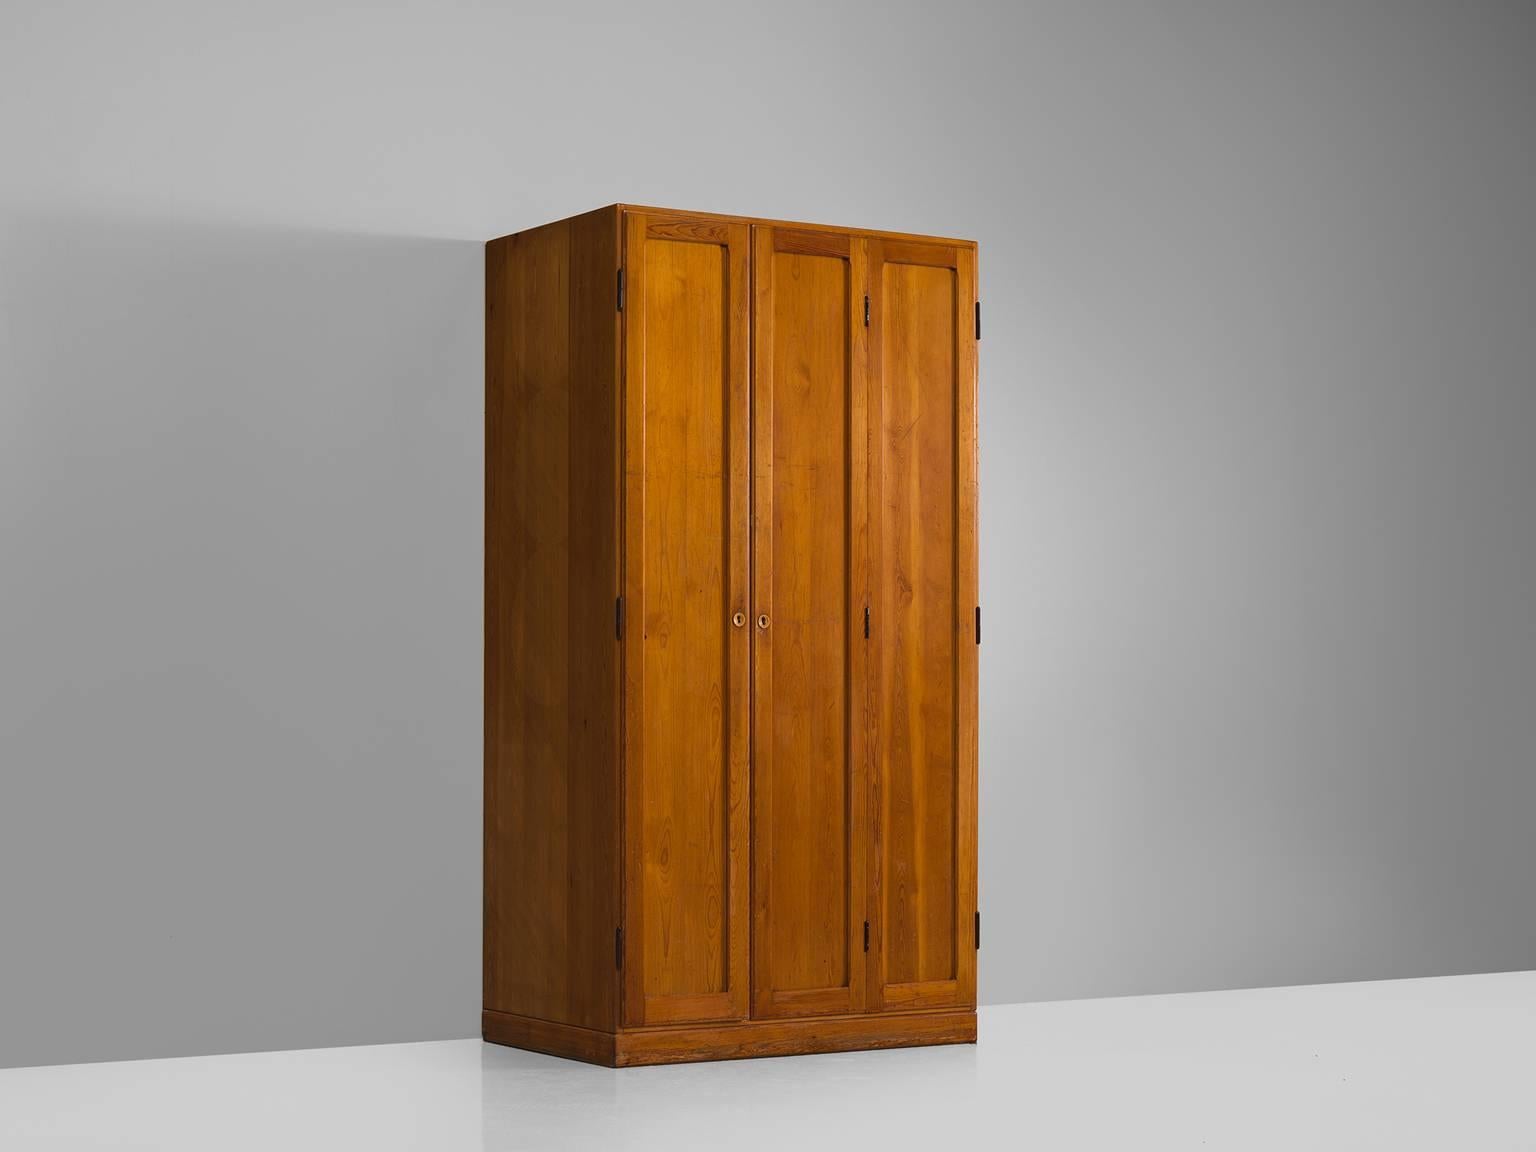 Børge Mogensen for FDB, cabinet, pine, Denmark, 1950s

This modest Danish wardrobe has two normal doors and one folding door provides plenty of storage. The cabinet is exemplary for the modest woodwork of Mogensen's design. It is a cabinet that is